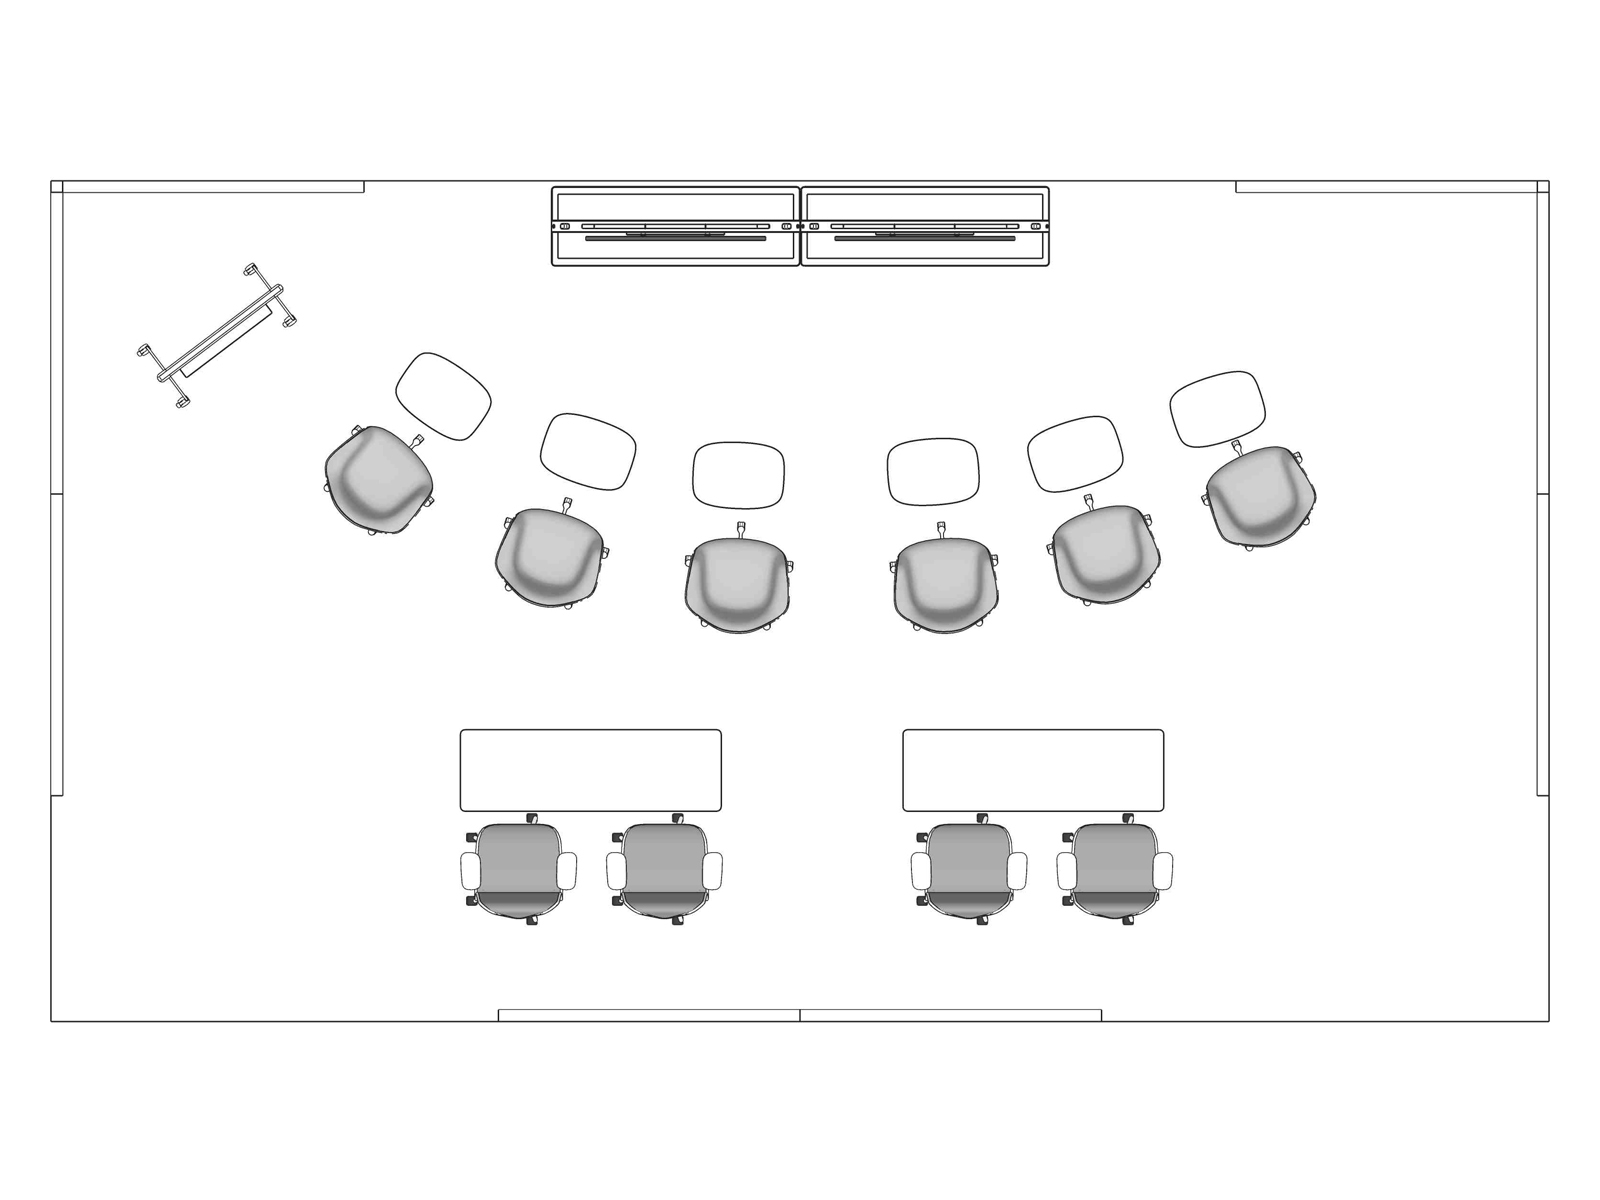 A line drawing viewed from above - Meeting Space 101